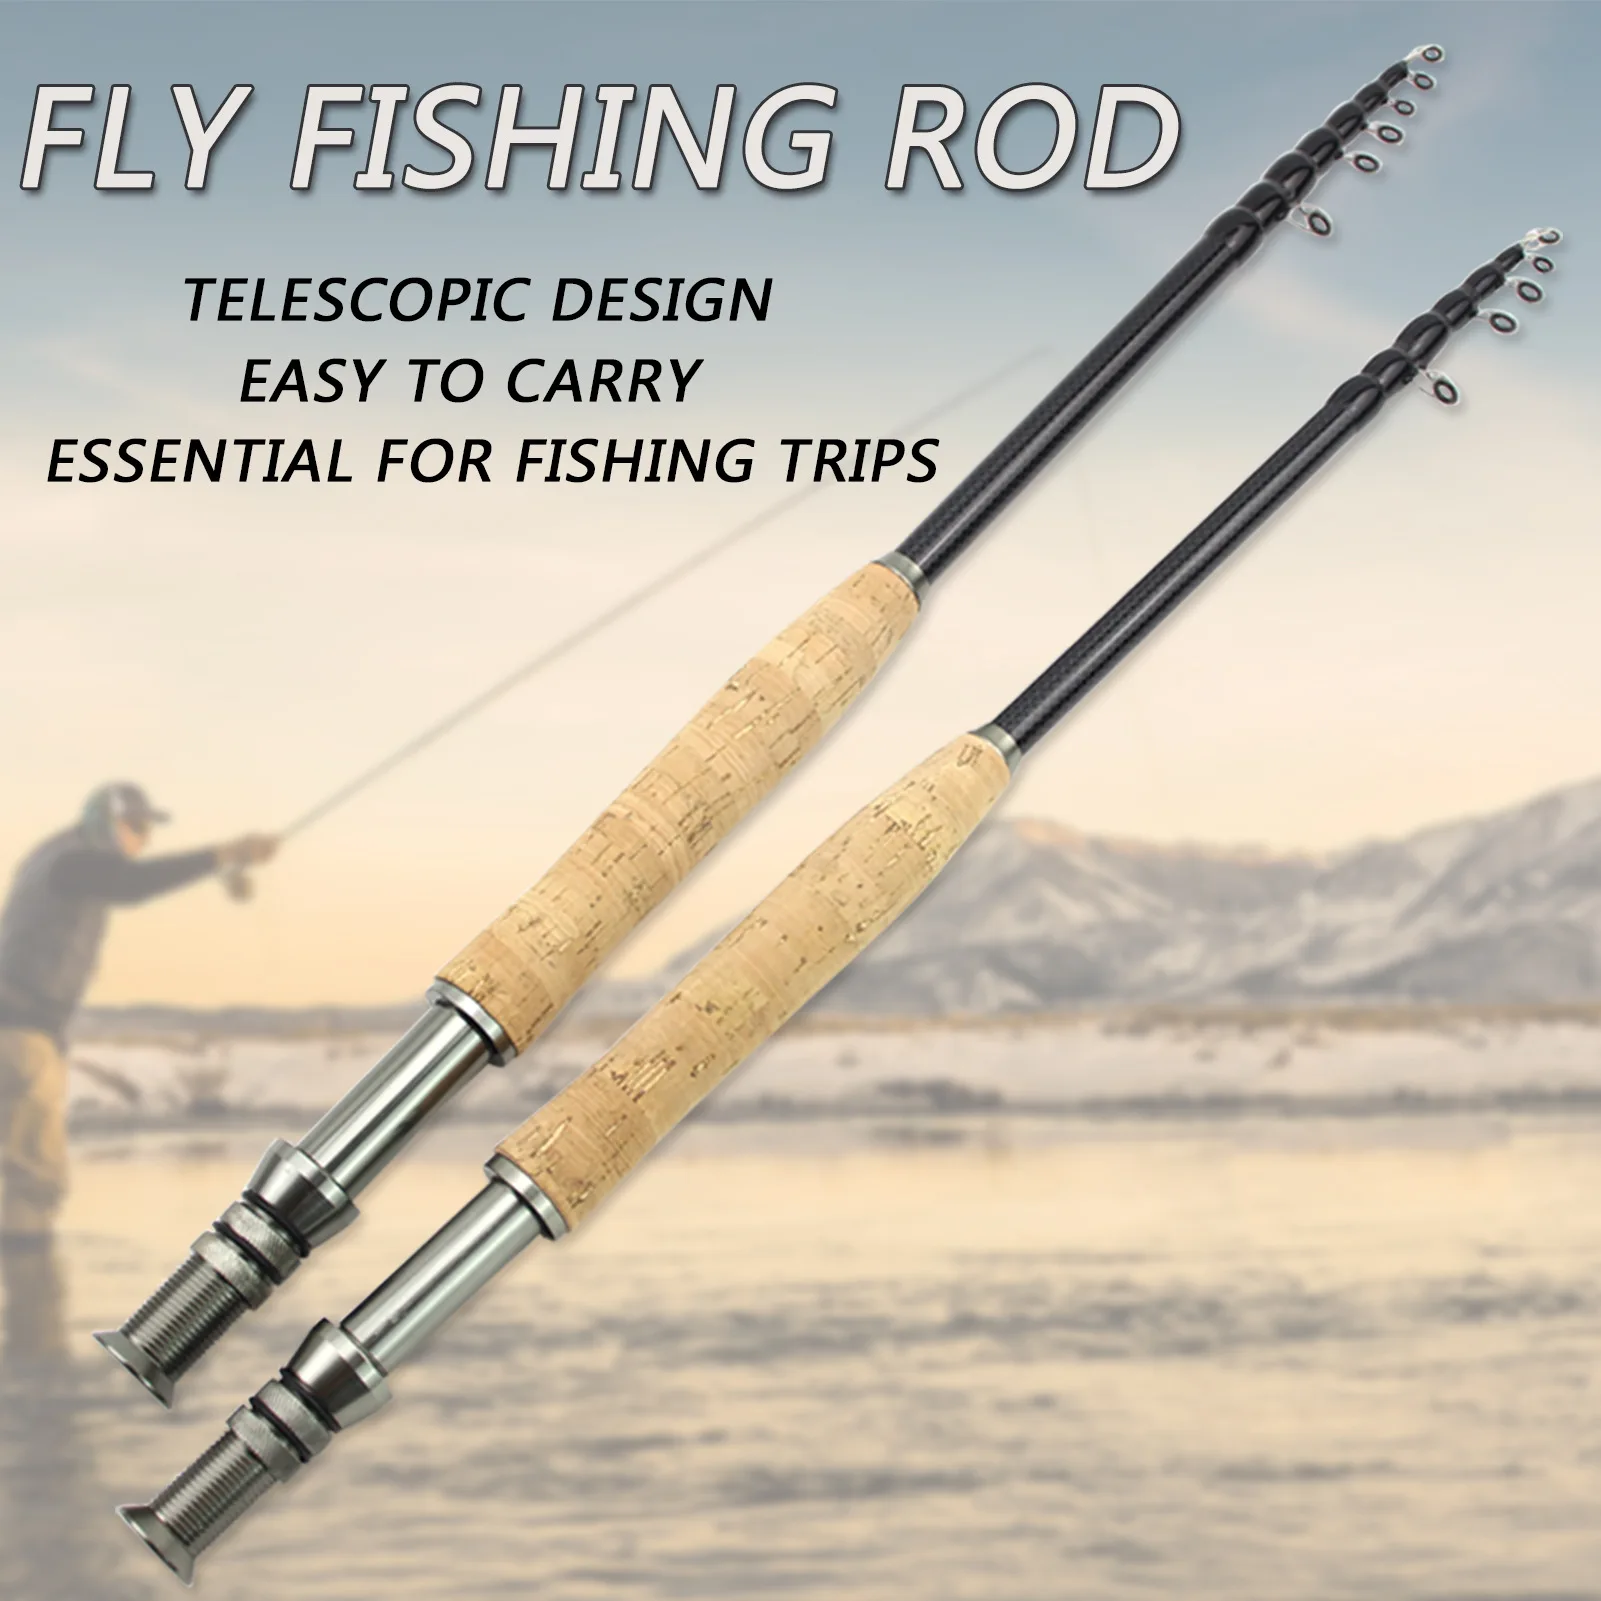 Fly fishing rod 6# 7# 9'6 10' High Canbon 3A cork Handle free